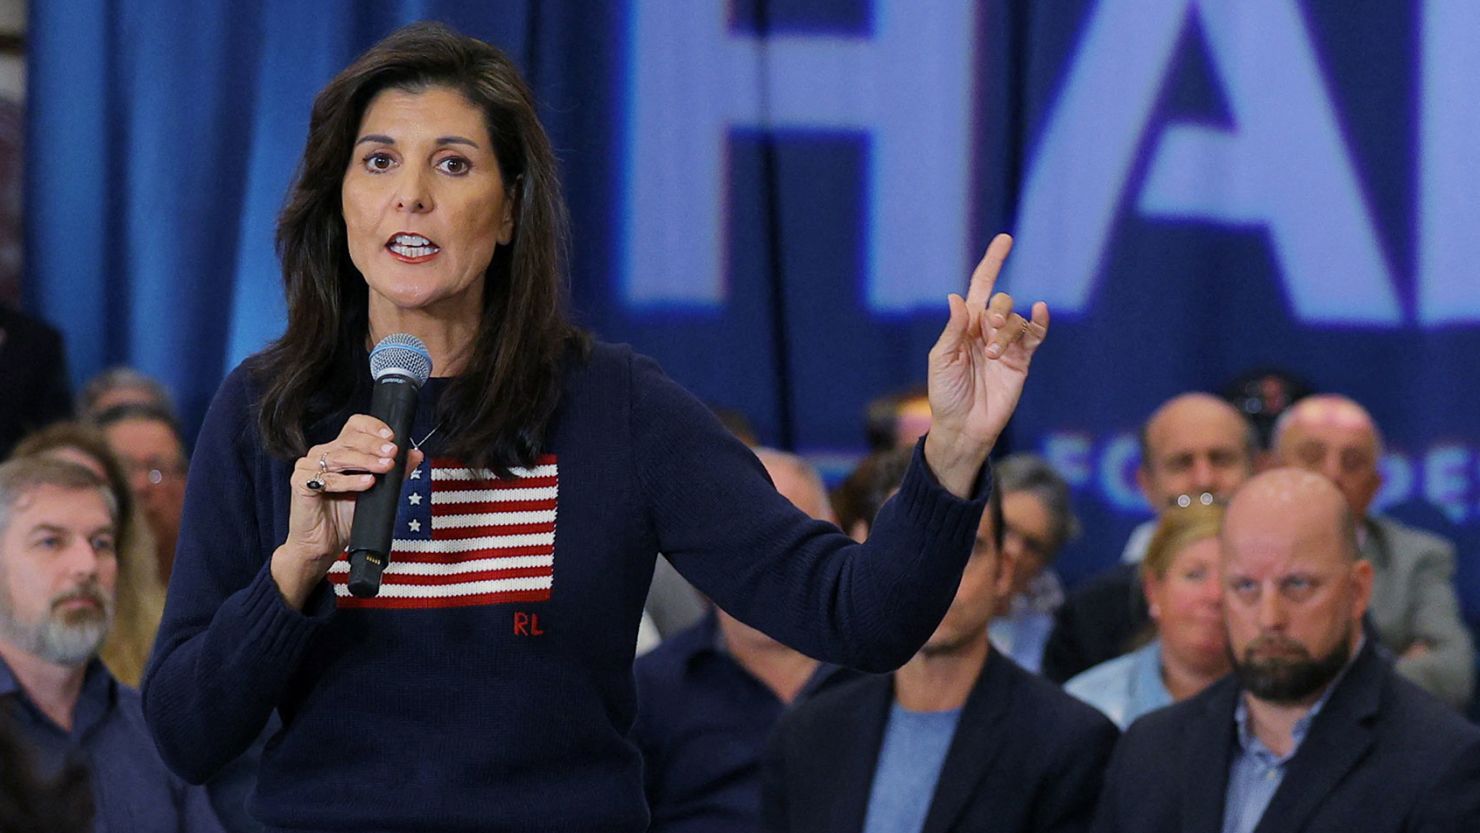 Republican presidential candidate Nikki Haley speaks during a campaign event in Bedford, New Hampshire, on April 26, 2023.